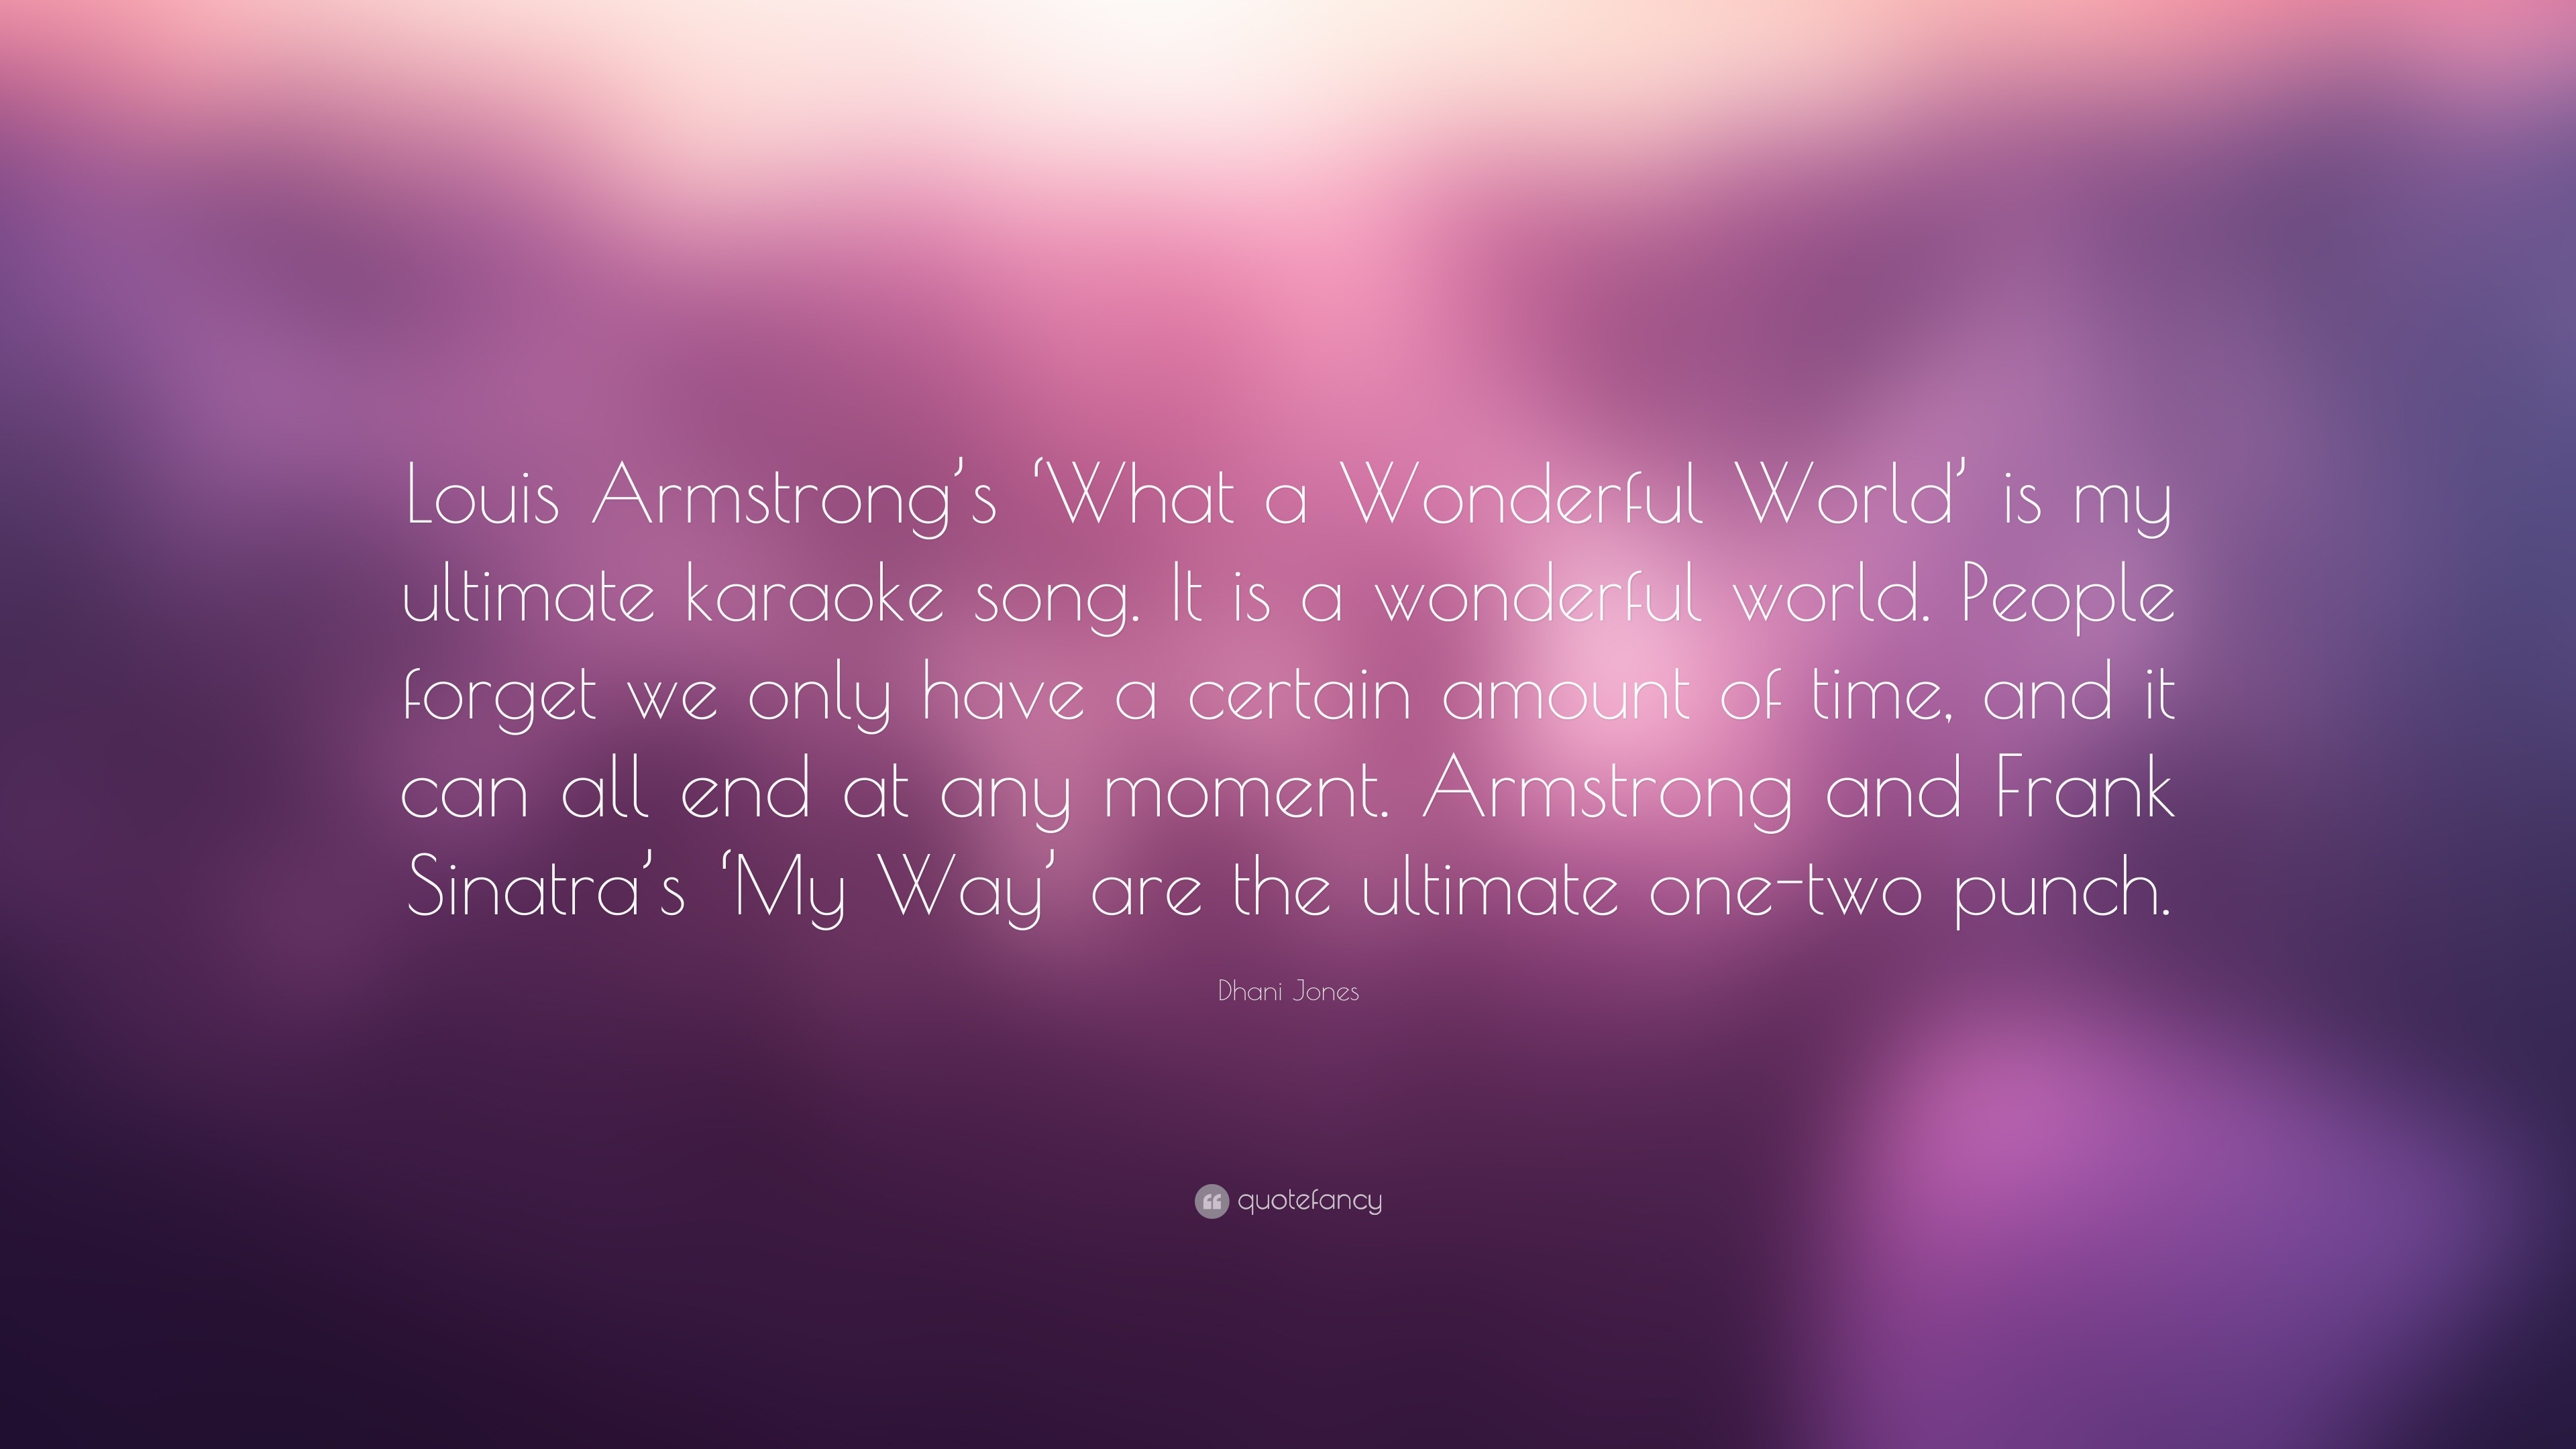 Dhani Jones quote: Louis Armstrong's 'What a Wonderful World' is my  ultimate karaoke